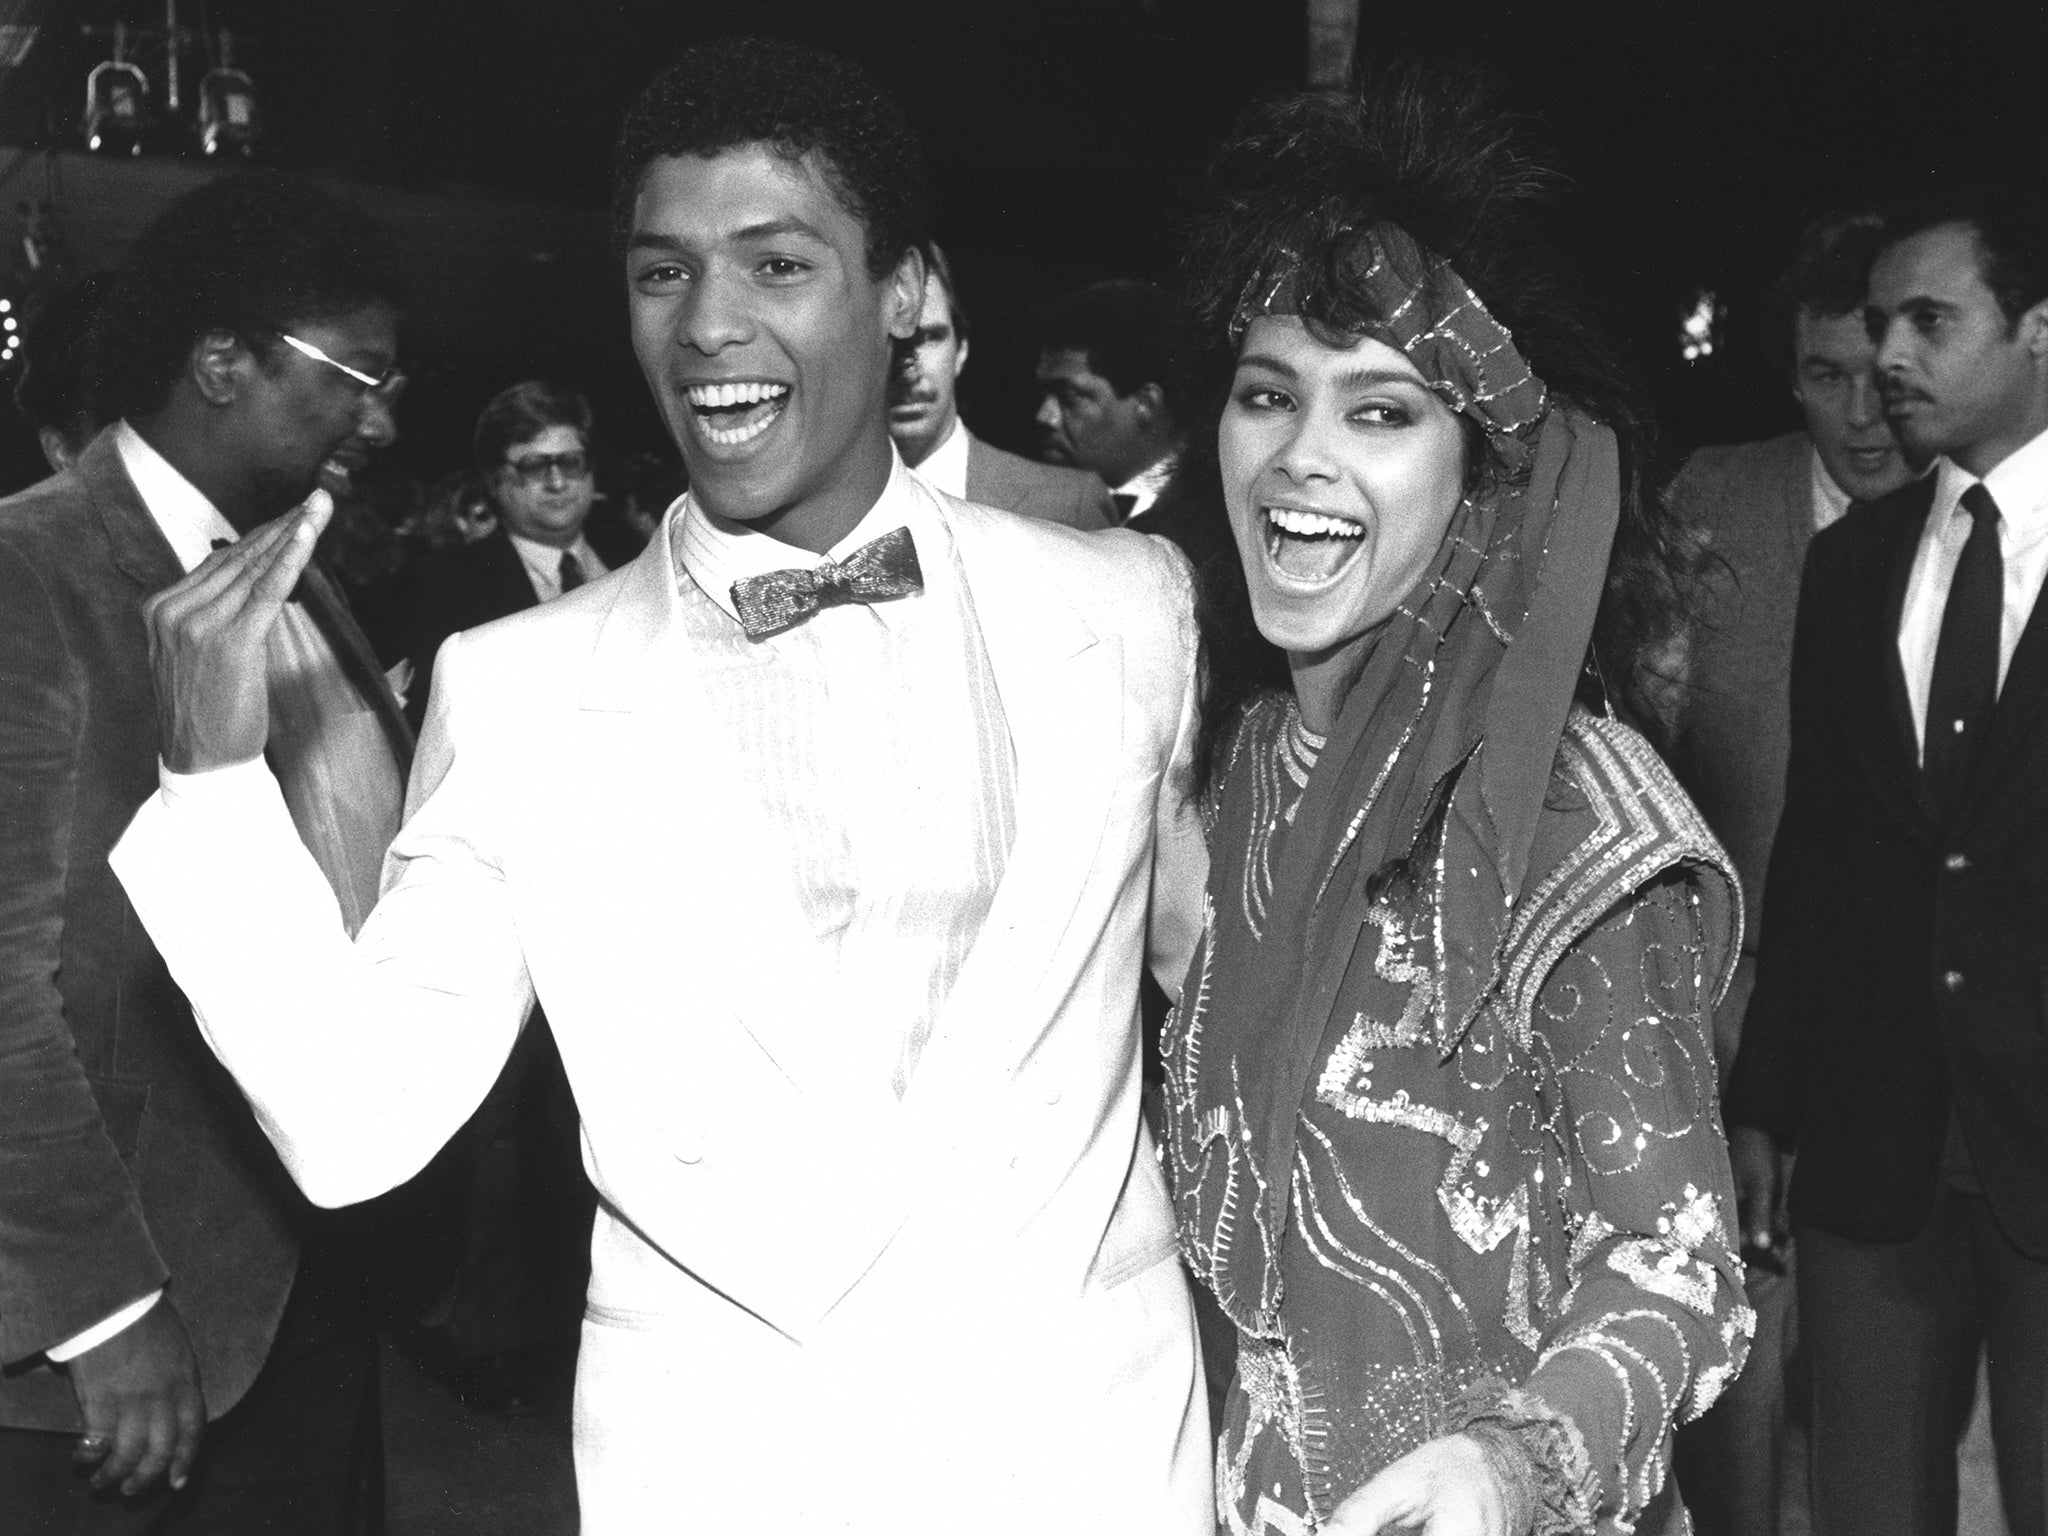 Vanity and the martial arts actor Taimak arrive at the premiere of their 1985 film ‘The Last Dragon’